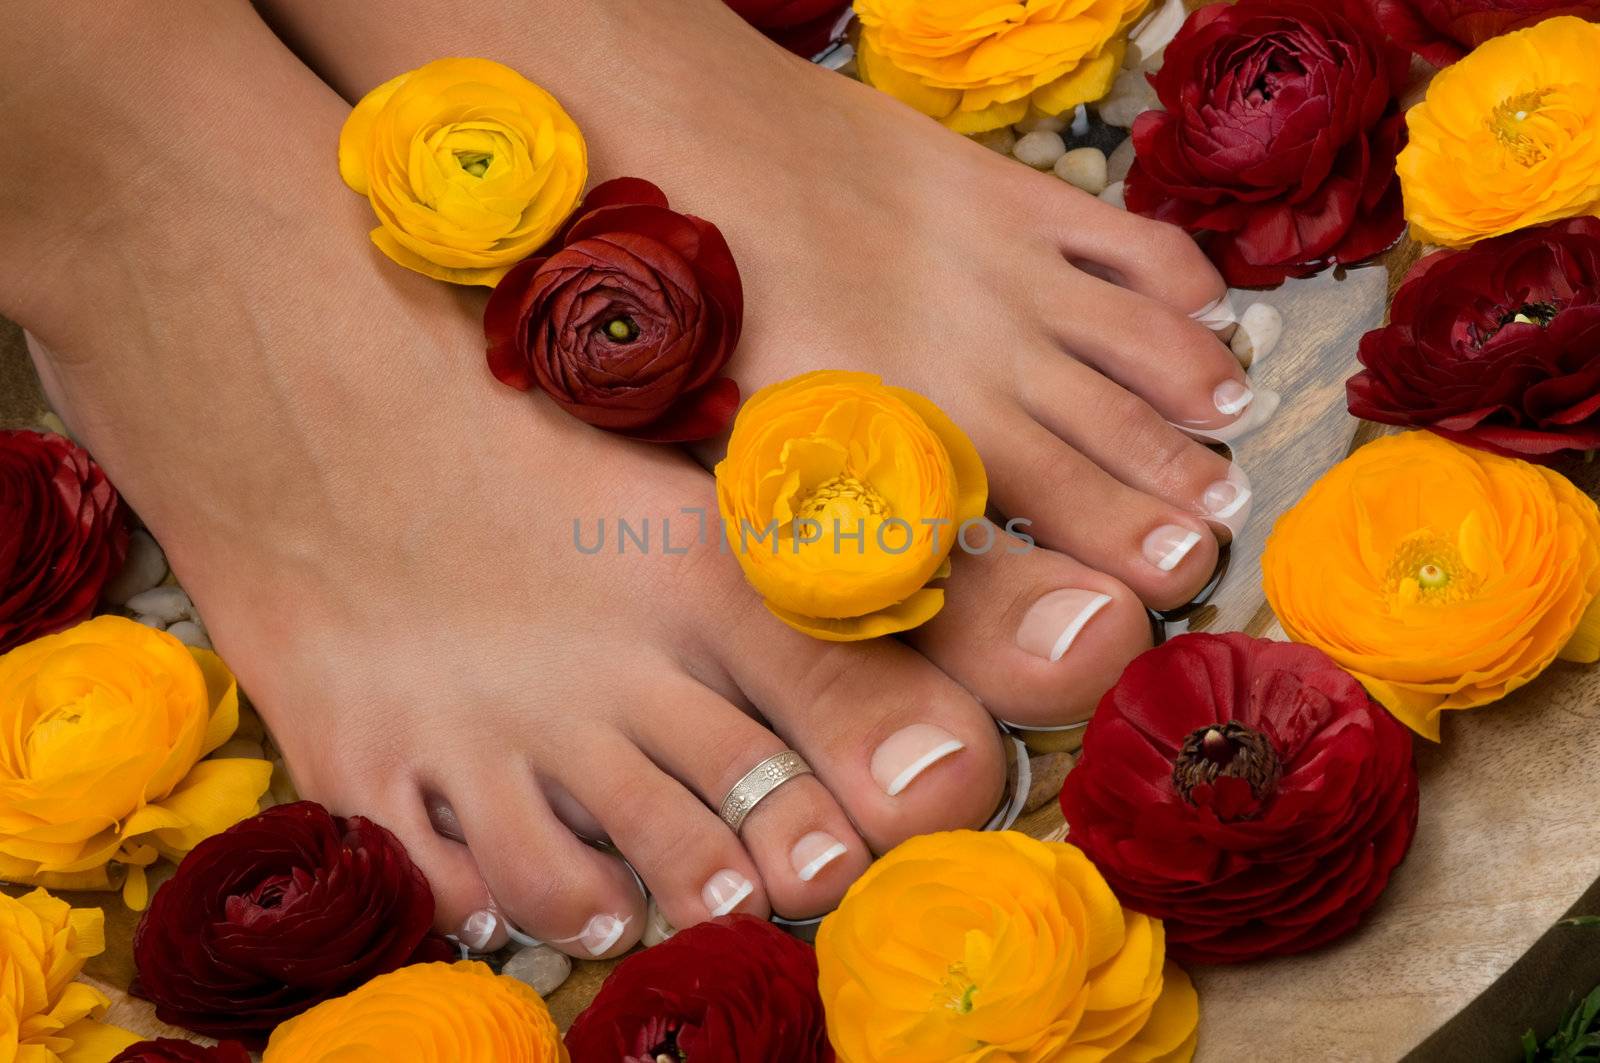 Spa treatment and pedicure with beautiful aromatic flowers